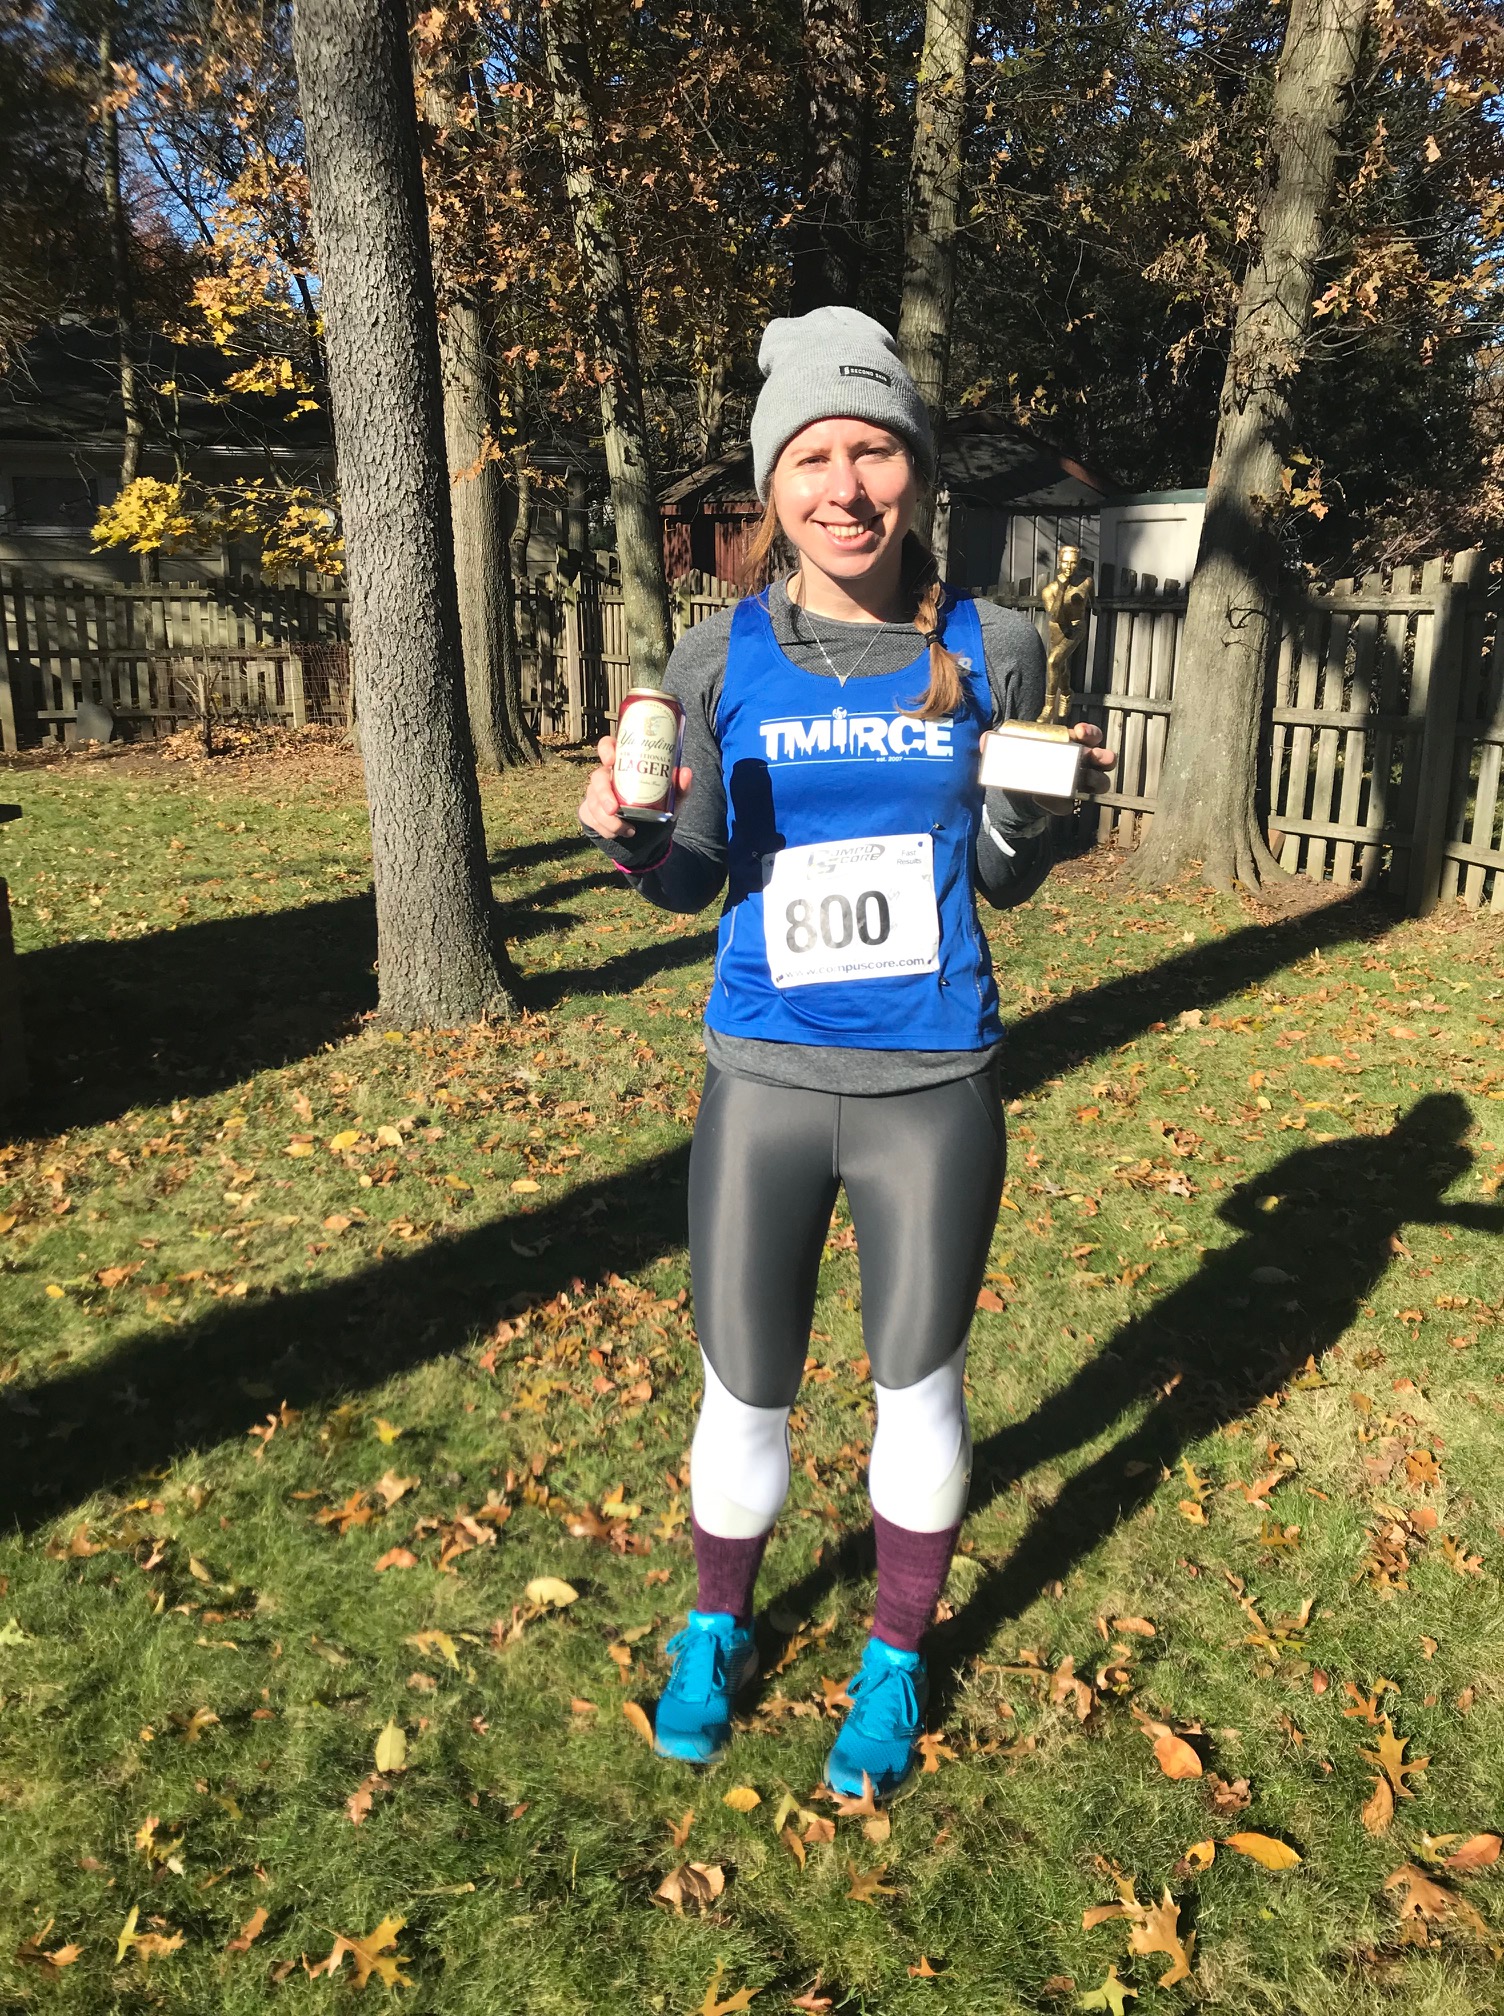 When A 5k Is So Much More Than 3.1 Miles – Run From Your Problems